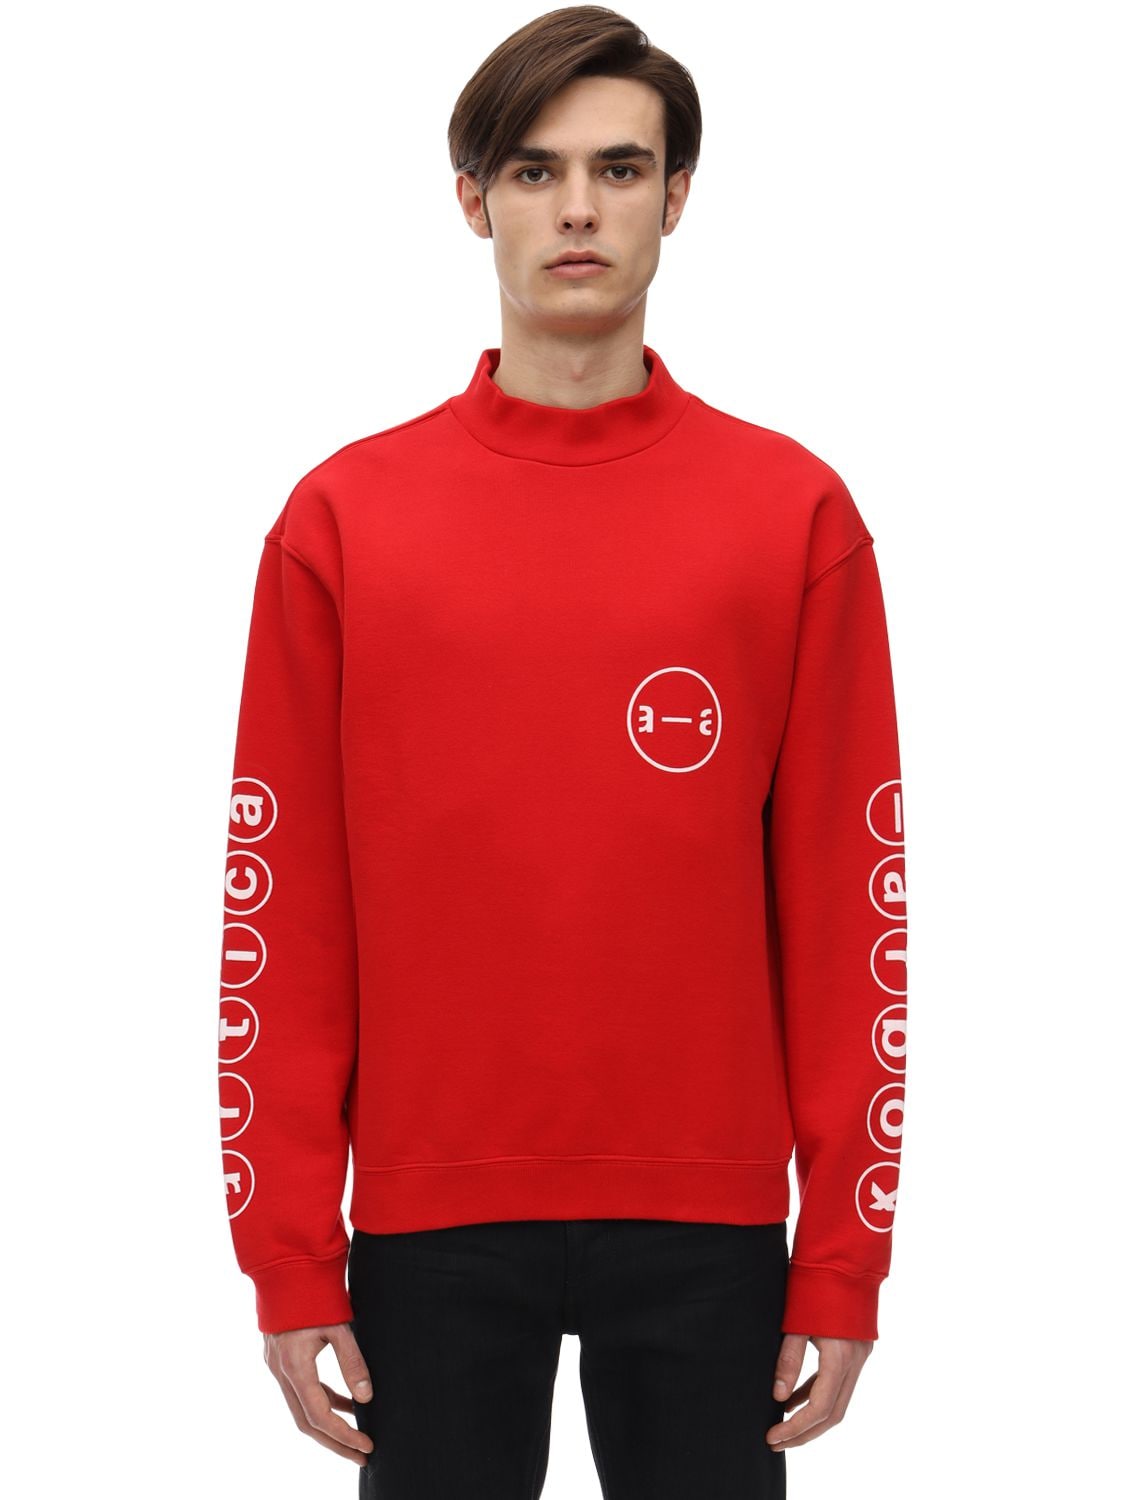 A-a   Artica-arbox Printed Cotton Jersey Sweatshirt In Red